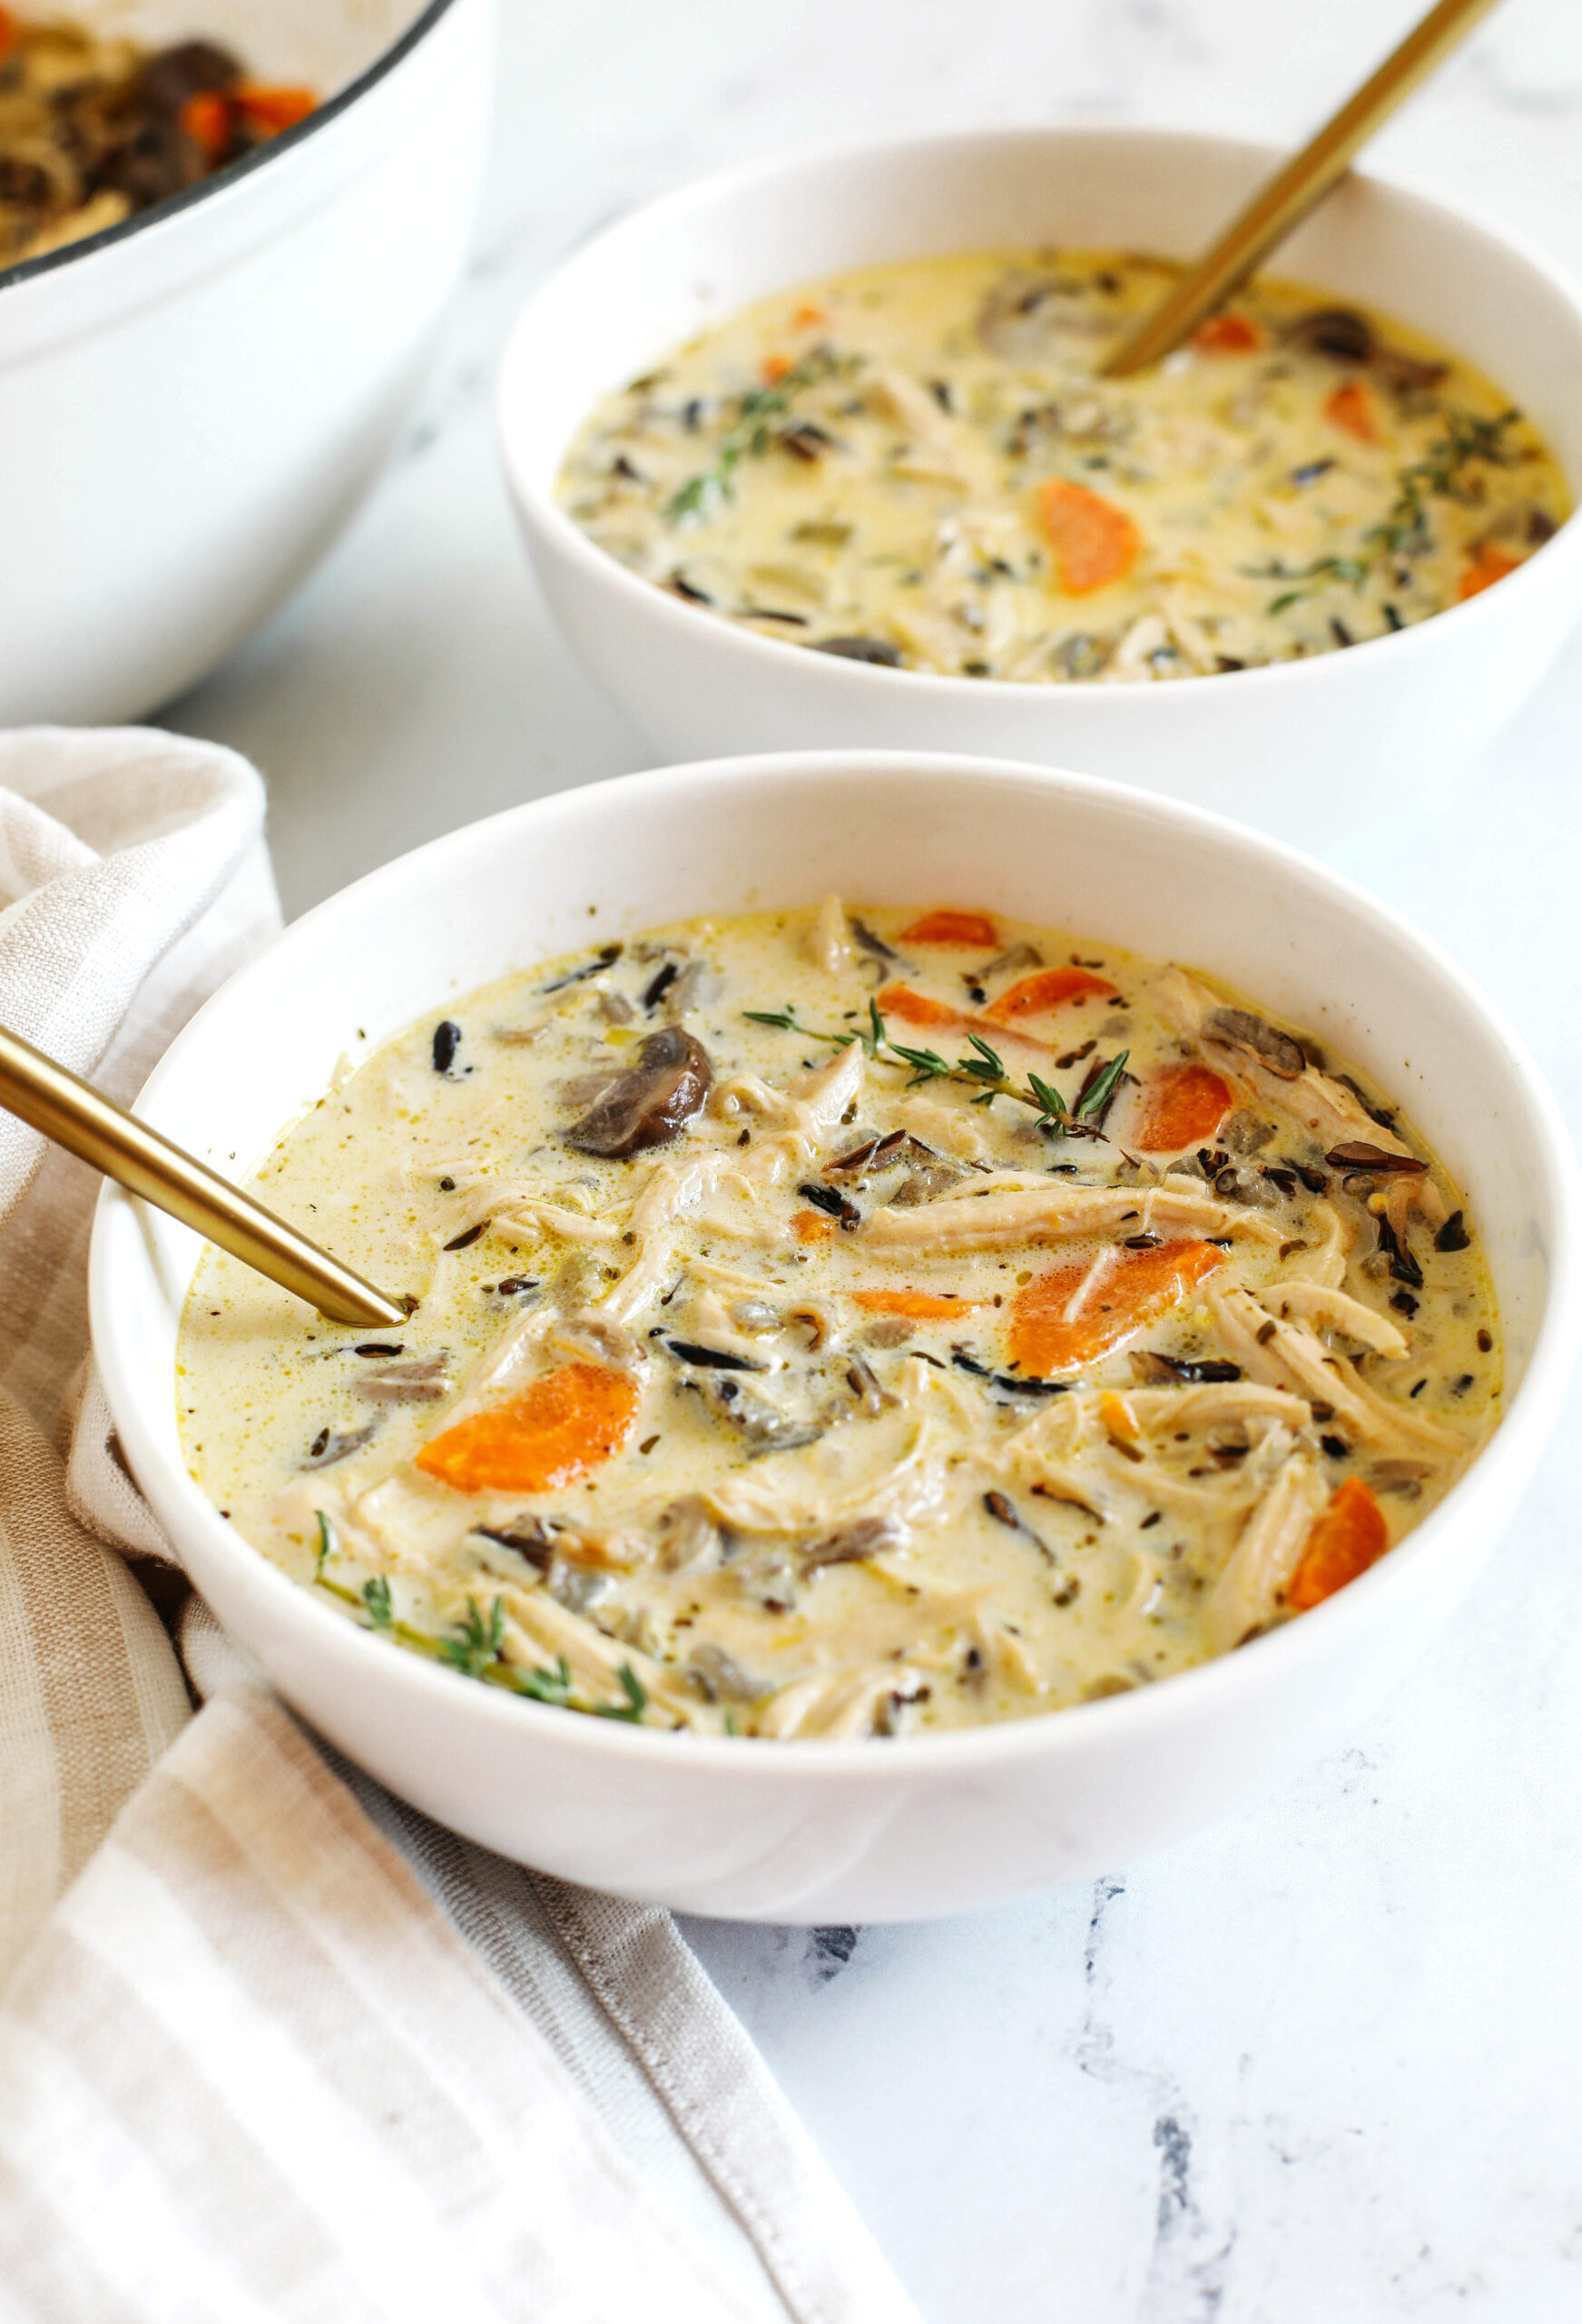 Creamy Chicken and Wild Rice Soup that is delicious, loaded with veggies and makes the perfect cozy meal that can easily made in your instant pot, slow cooker or right on the stove!